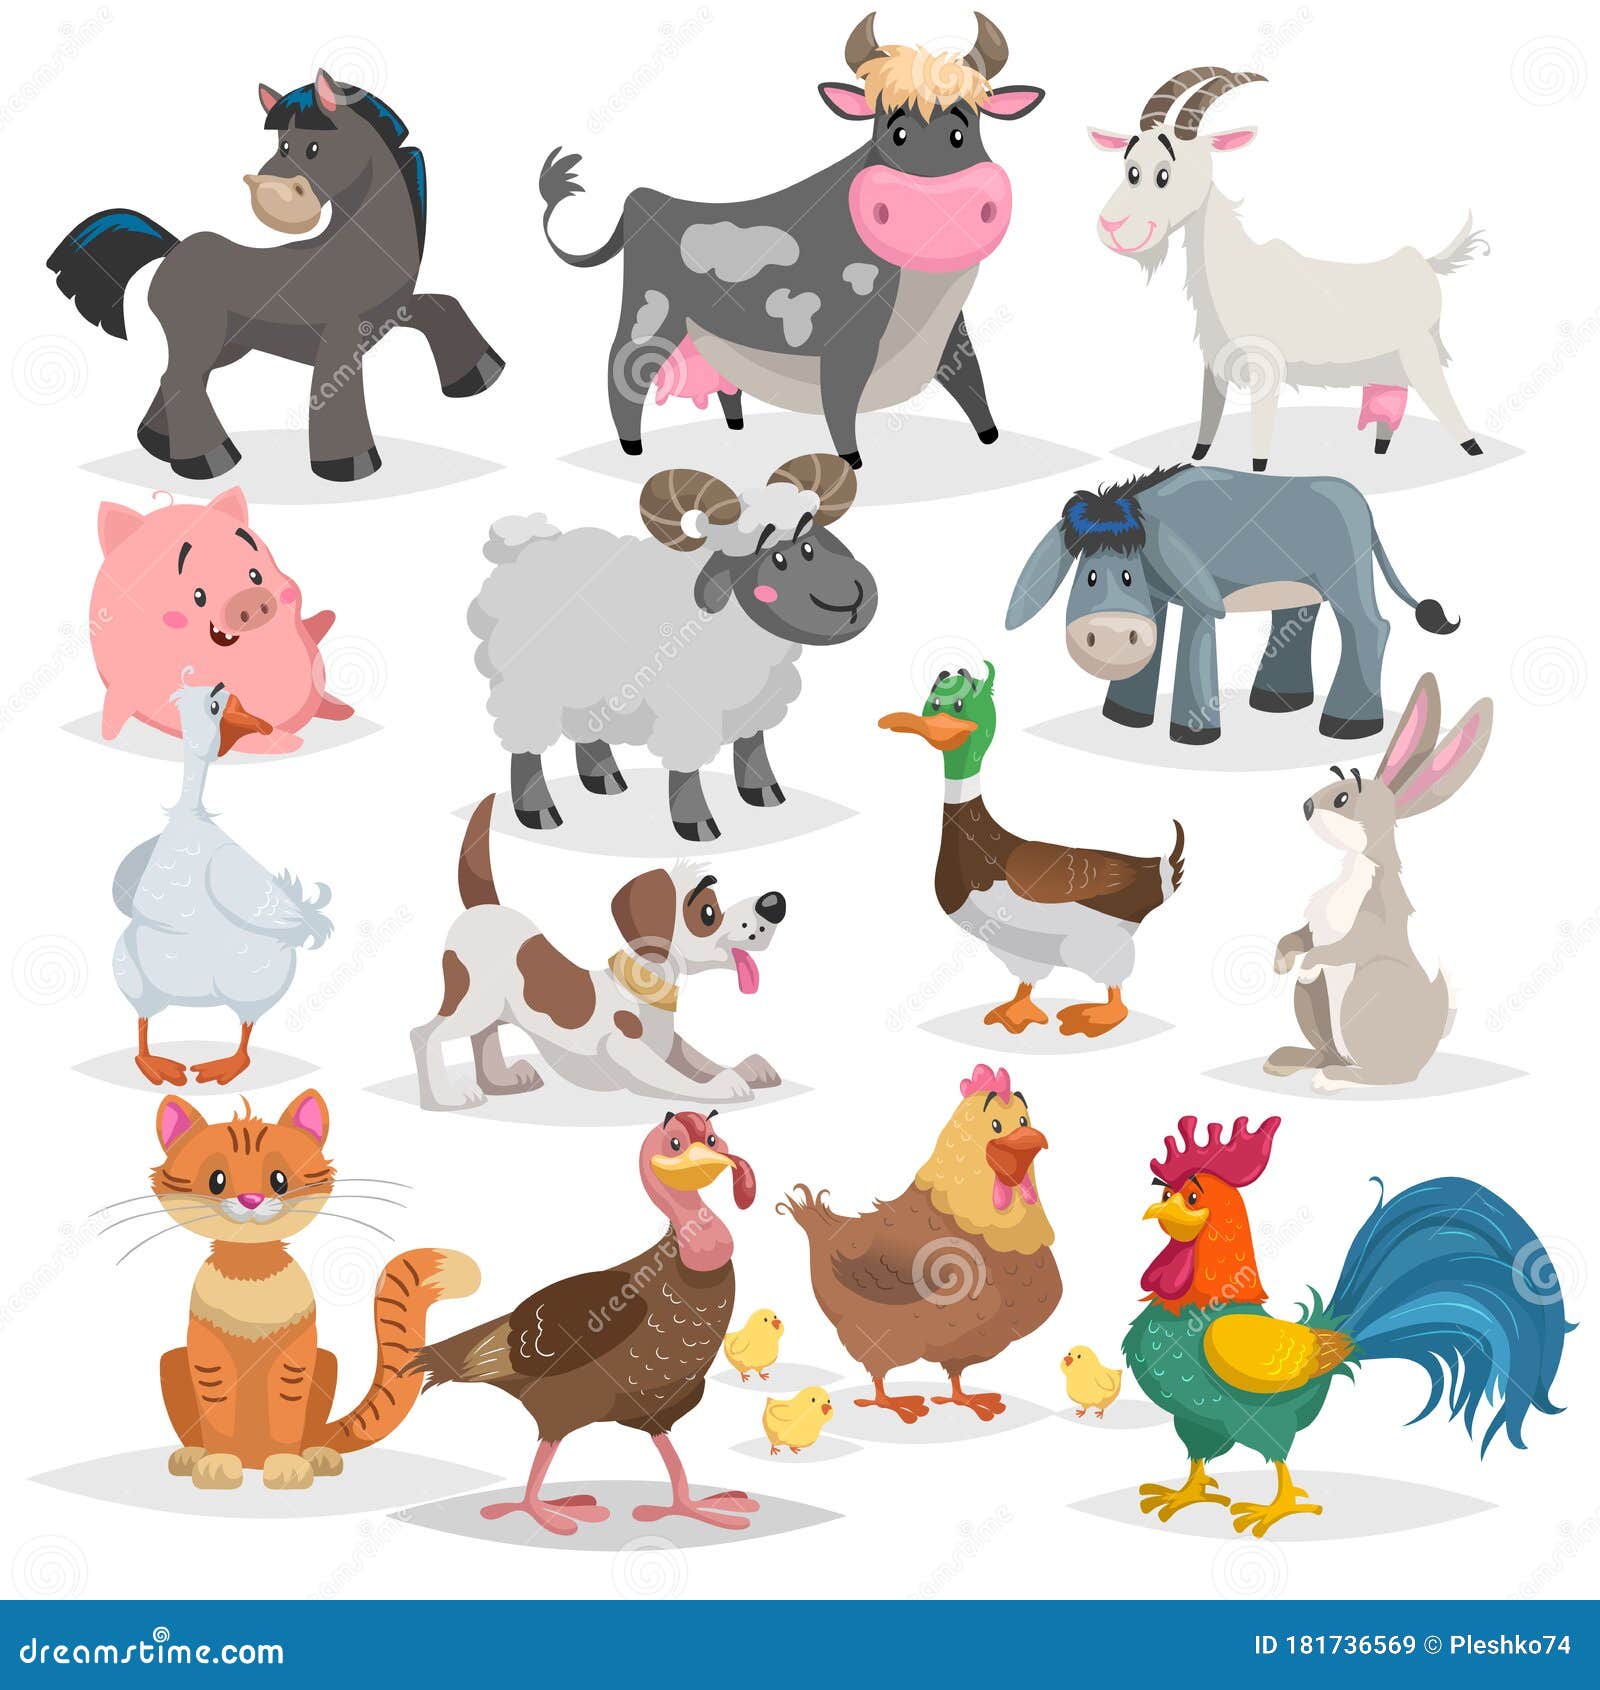 Cute Farm Animals Set. Collection of Cartoon Vector Drawings in Flat Style  Stock Vector - Illustration of flat, colorful: 181736569